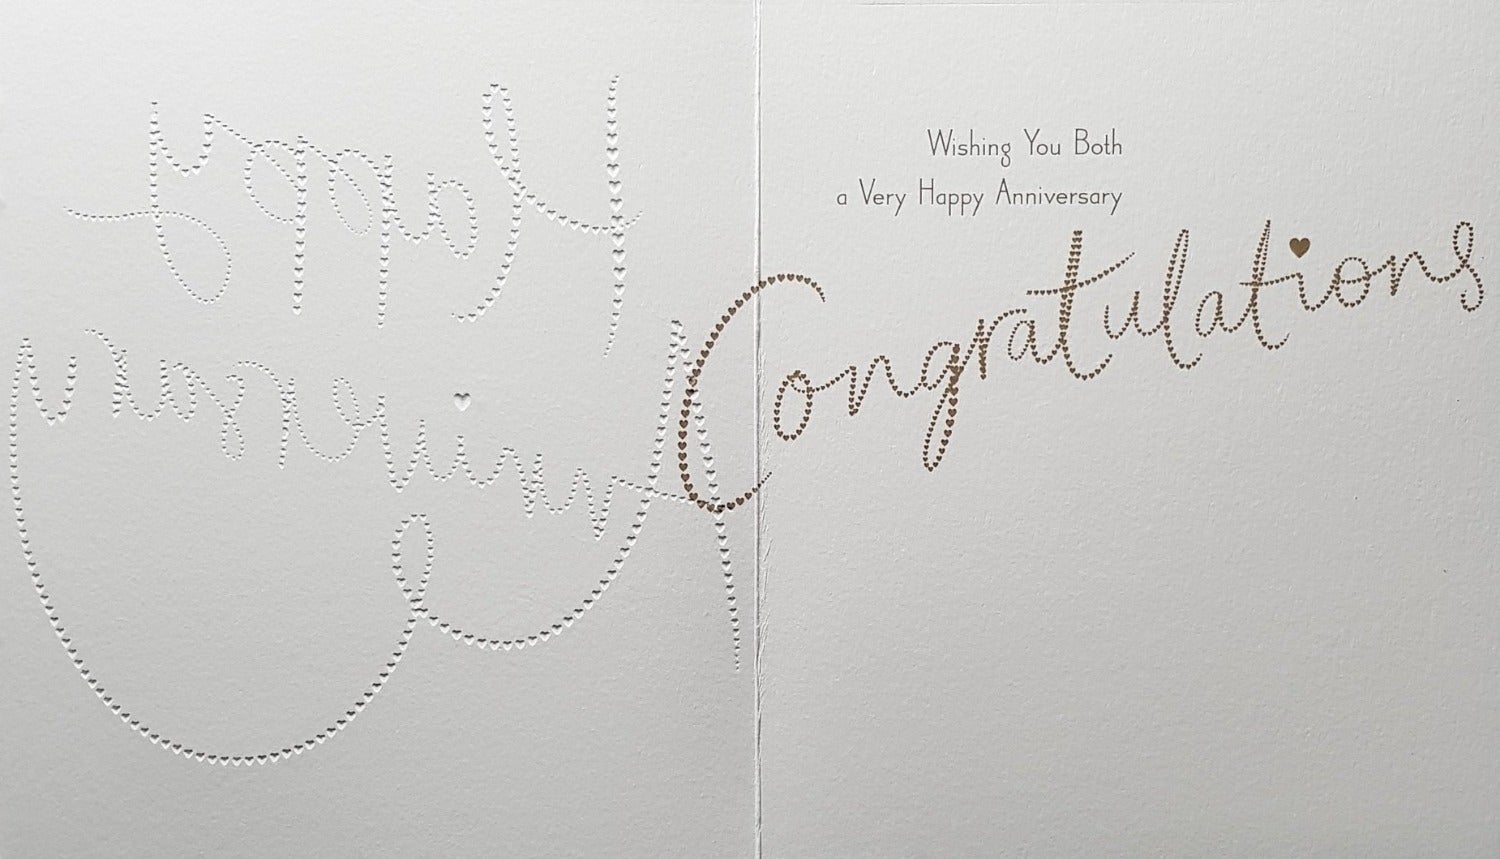 Anniversary Card - Gold Heart Font & 'Celebrate In Style'